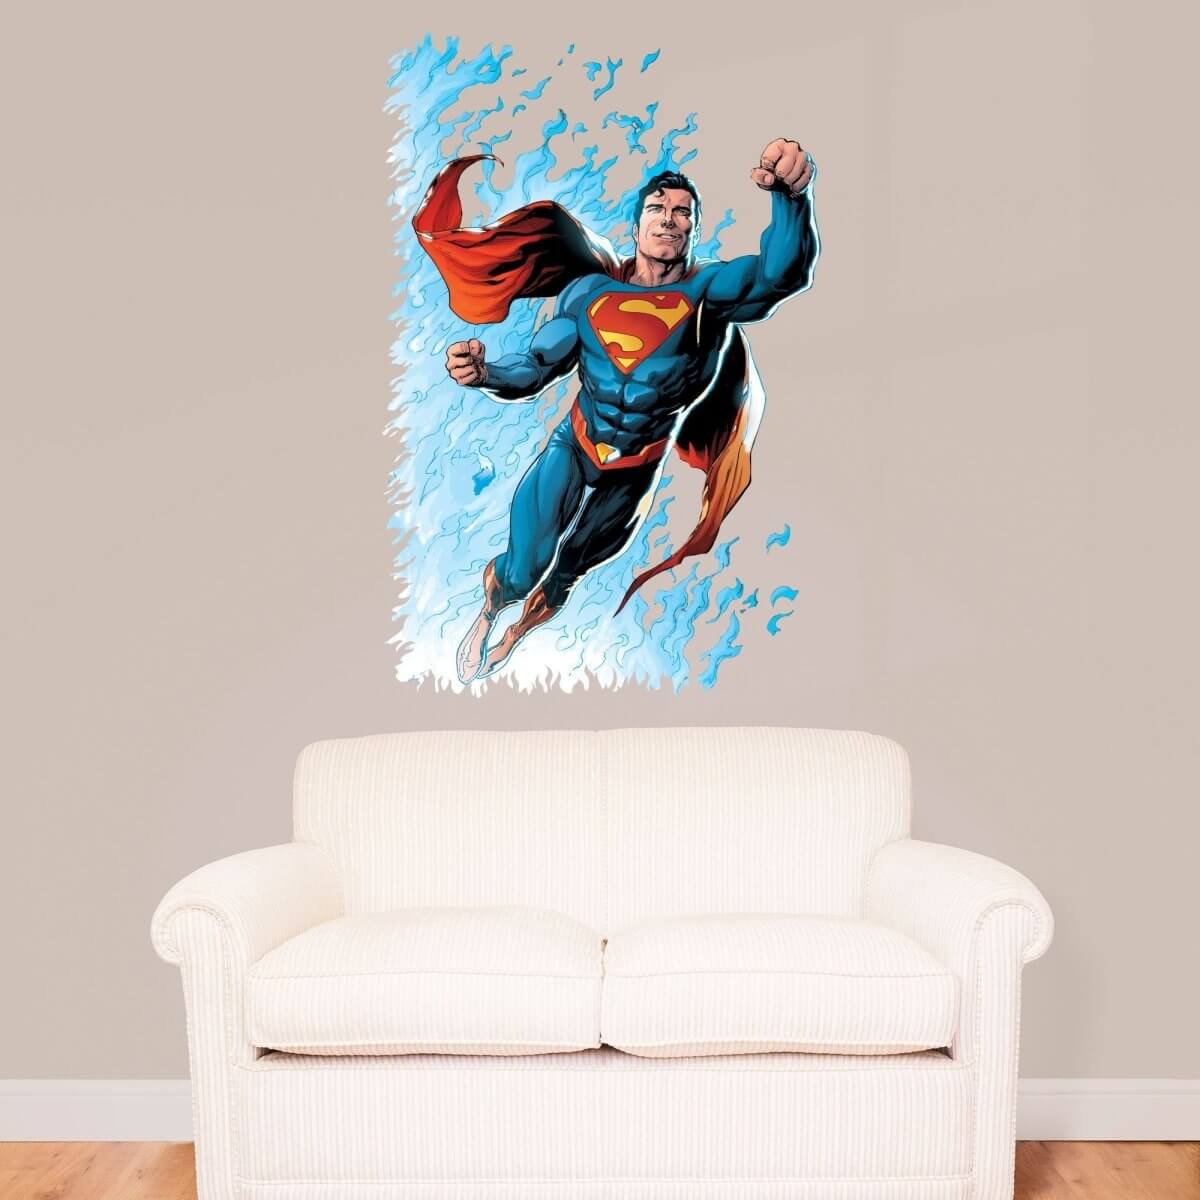 Kismet Decals Action Comics #976 Comic Cover Series Licensed Wall Sticker - Easy DIY Home & Room Decor Wall Art - Kismet Decals